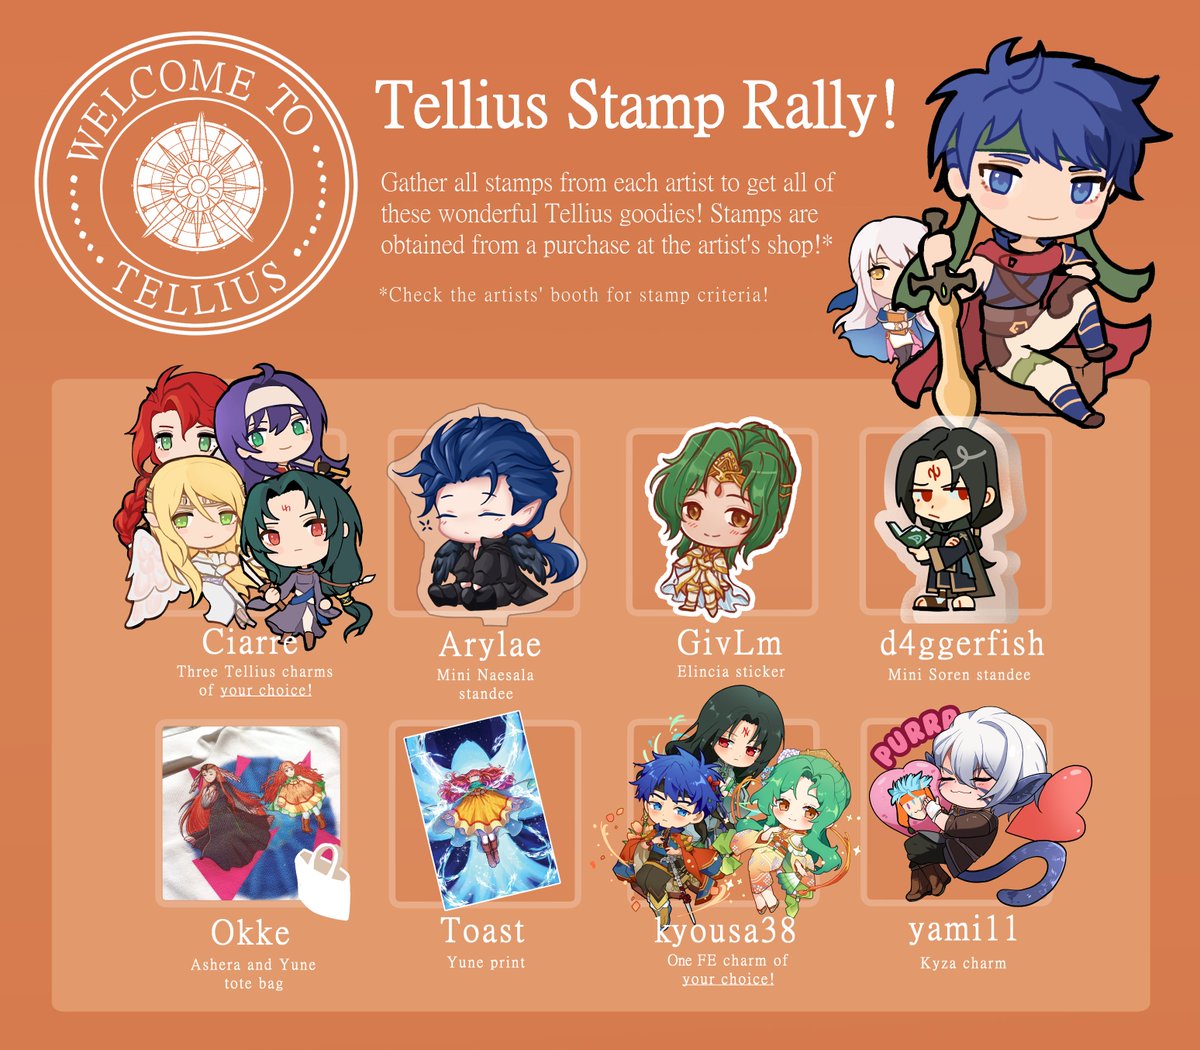 we also have something very exciting this year!! tellius stamp rally! ✨